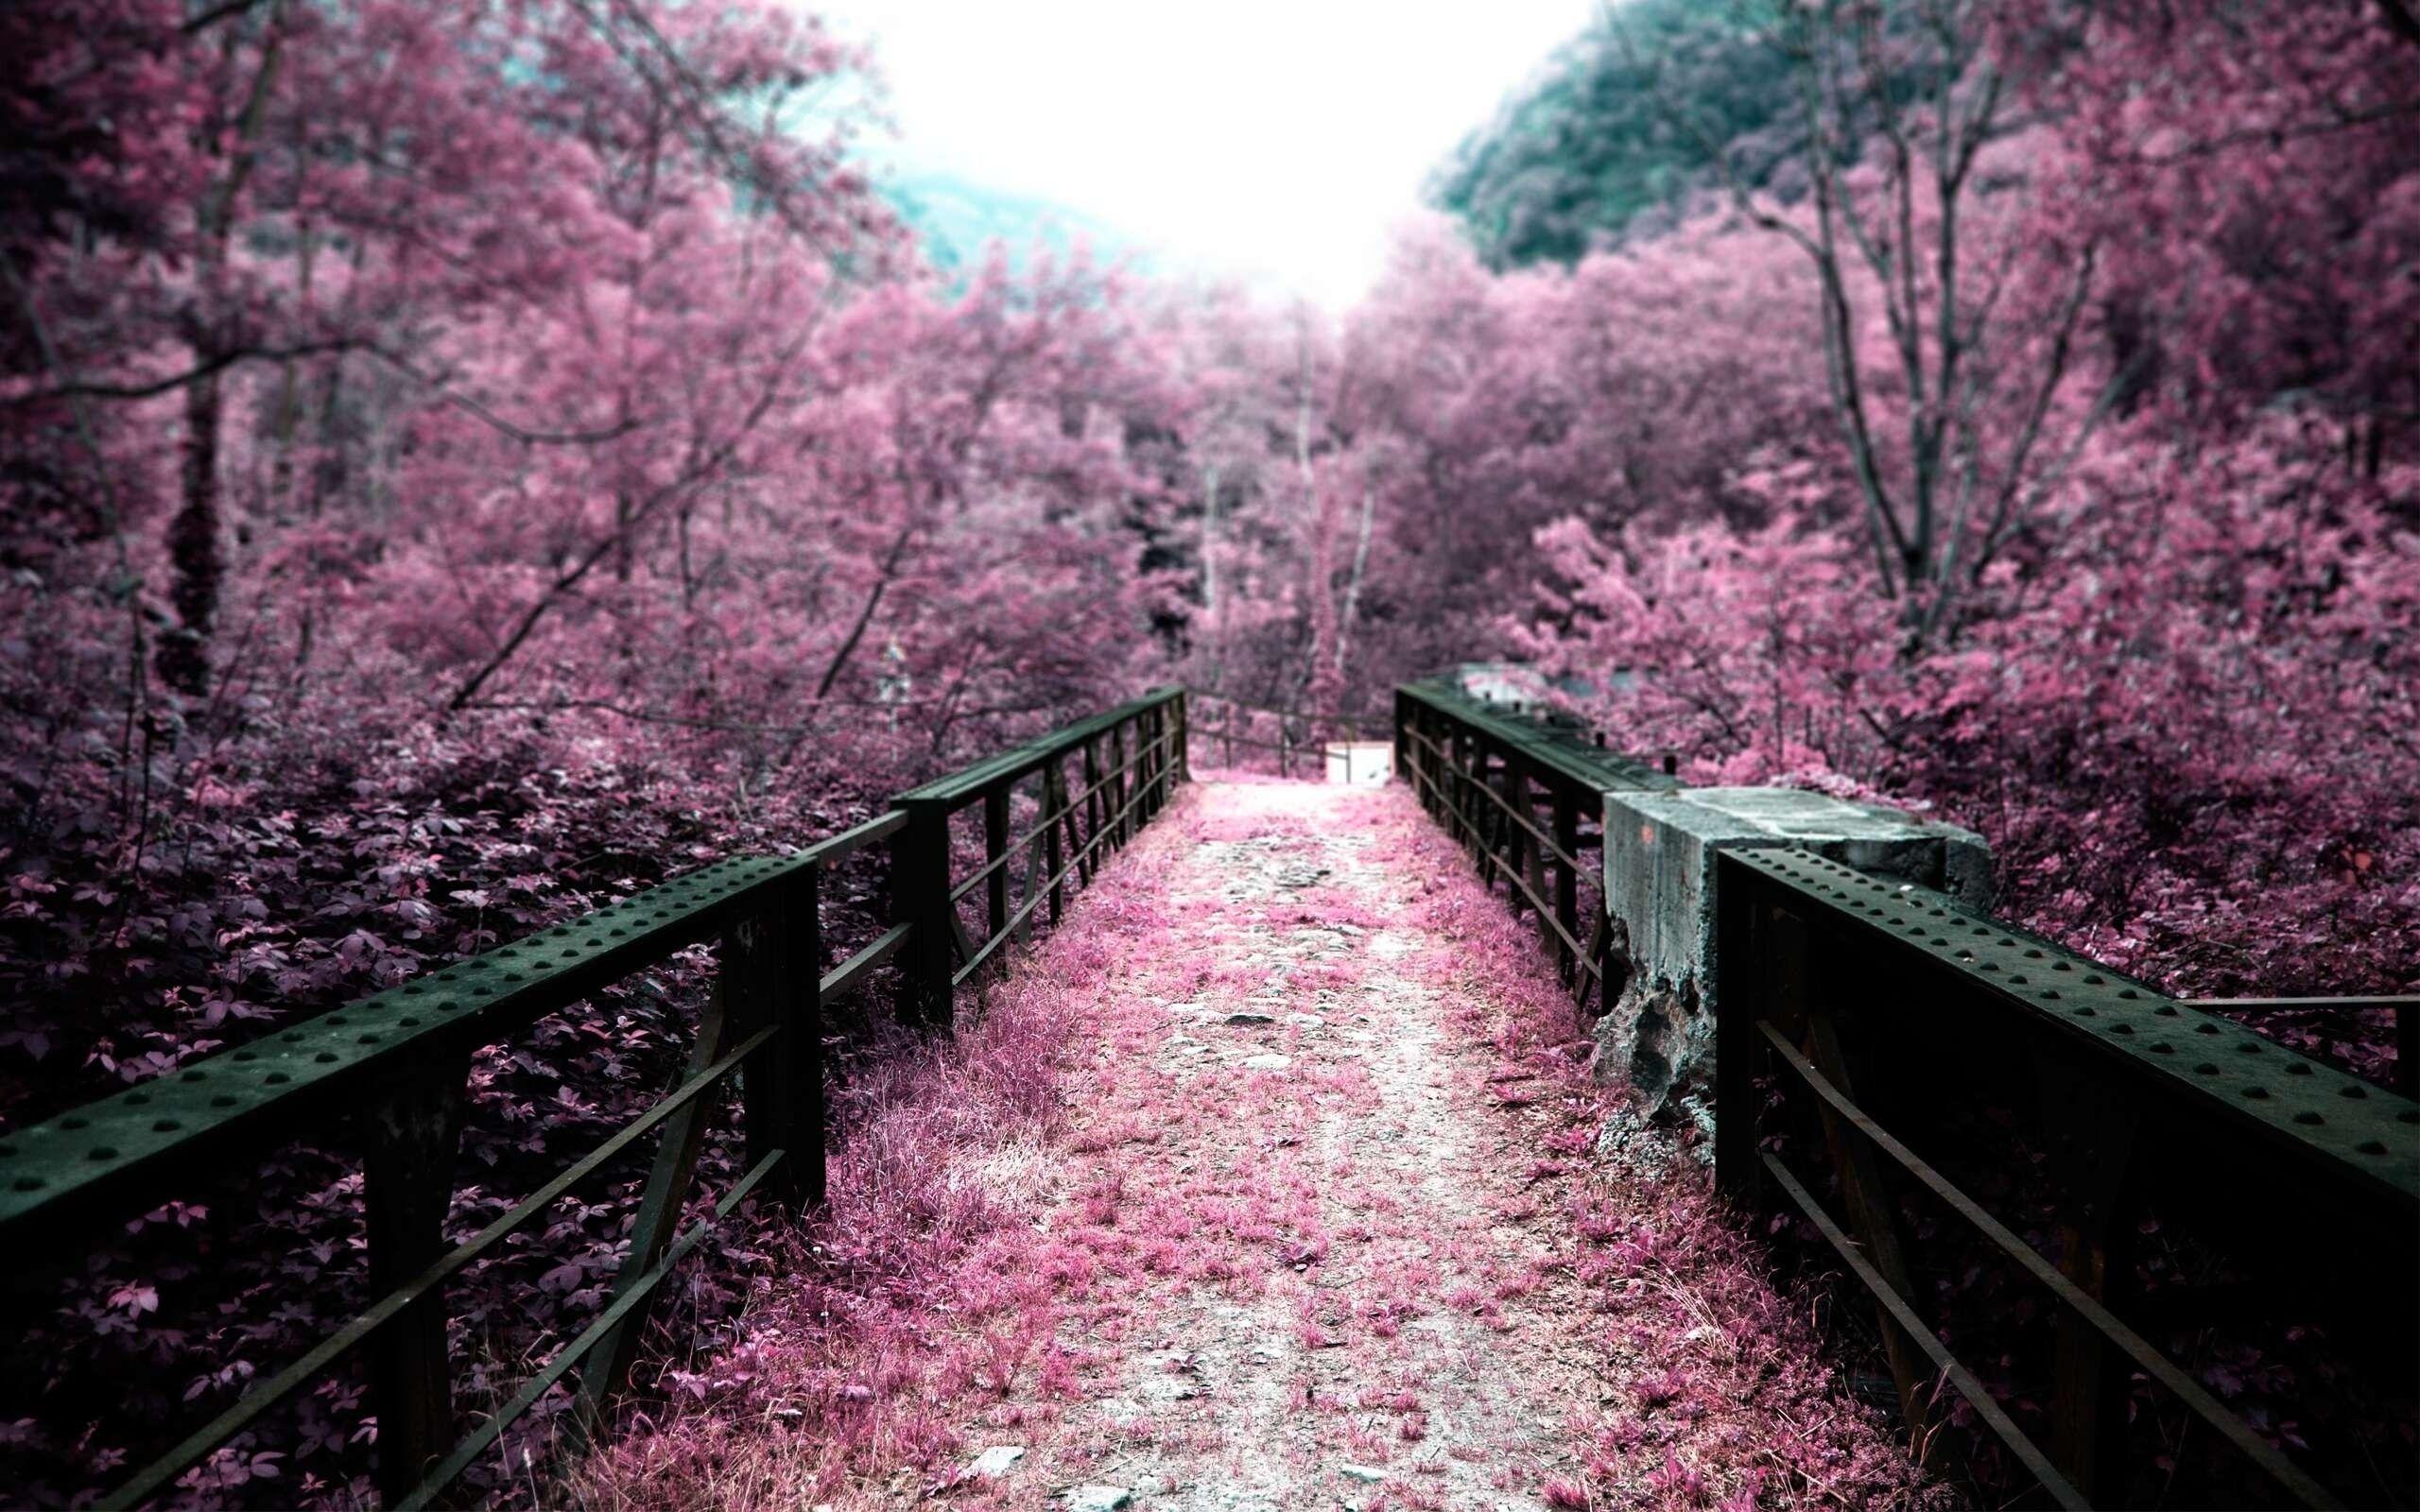 Cherry blossoms bridges depth of field selective coloring pink